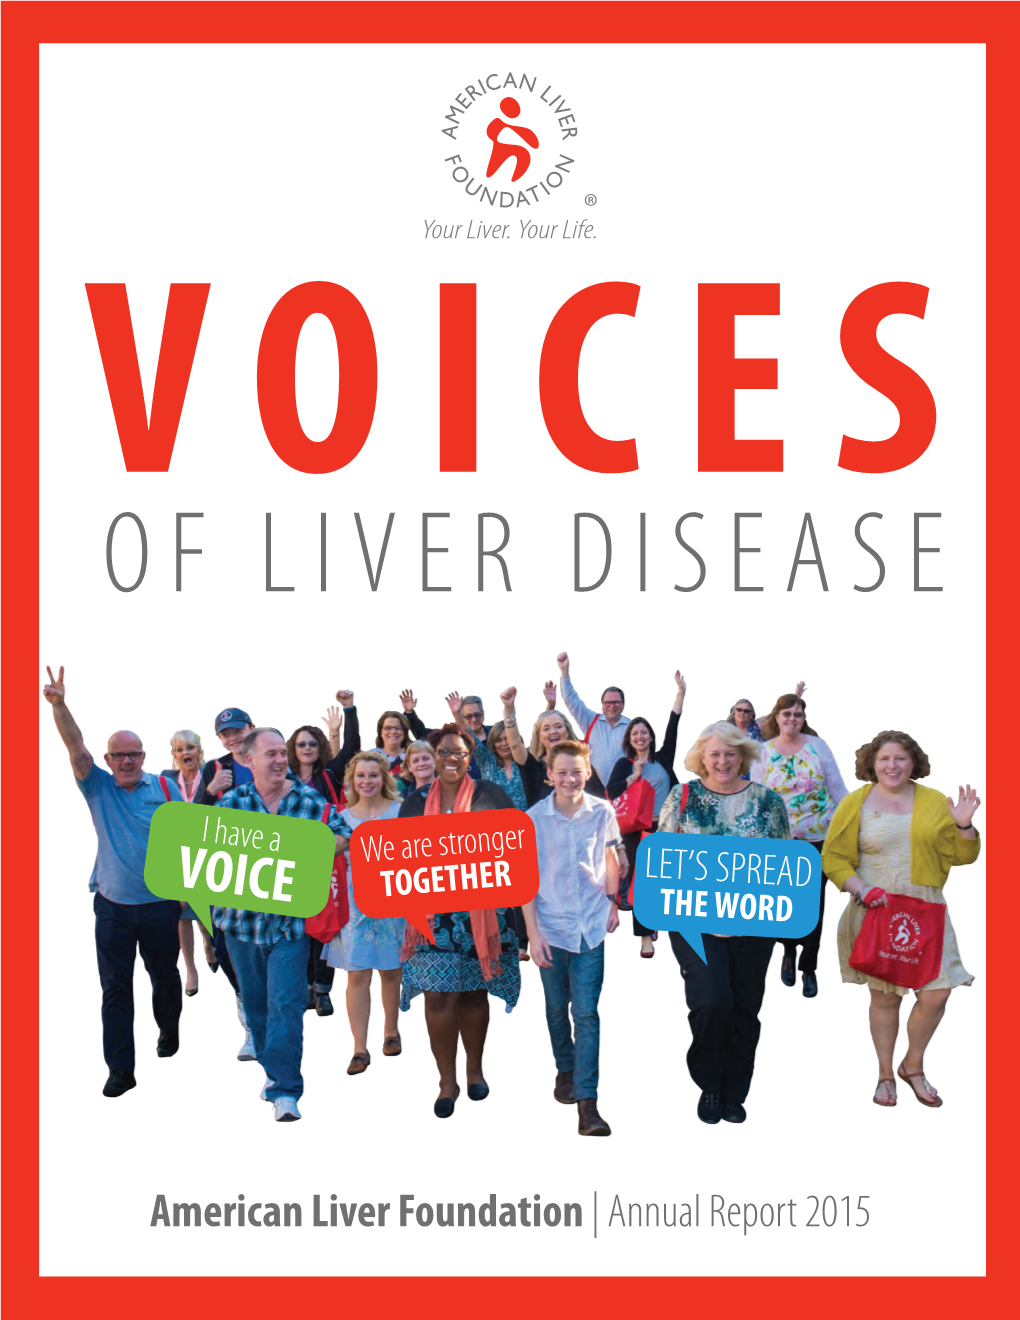 Annual Report 2015 It Is My Pleasure to Welcome You to the American Liver Foundation’S 2015 Annual Report